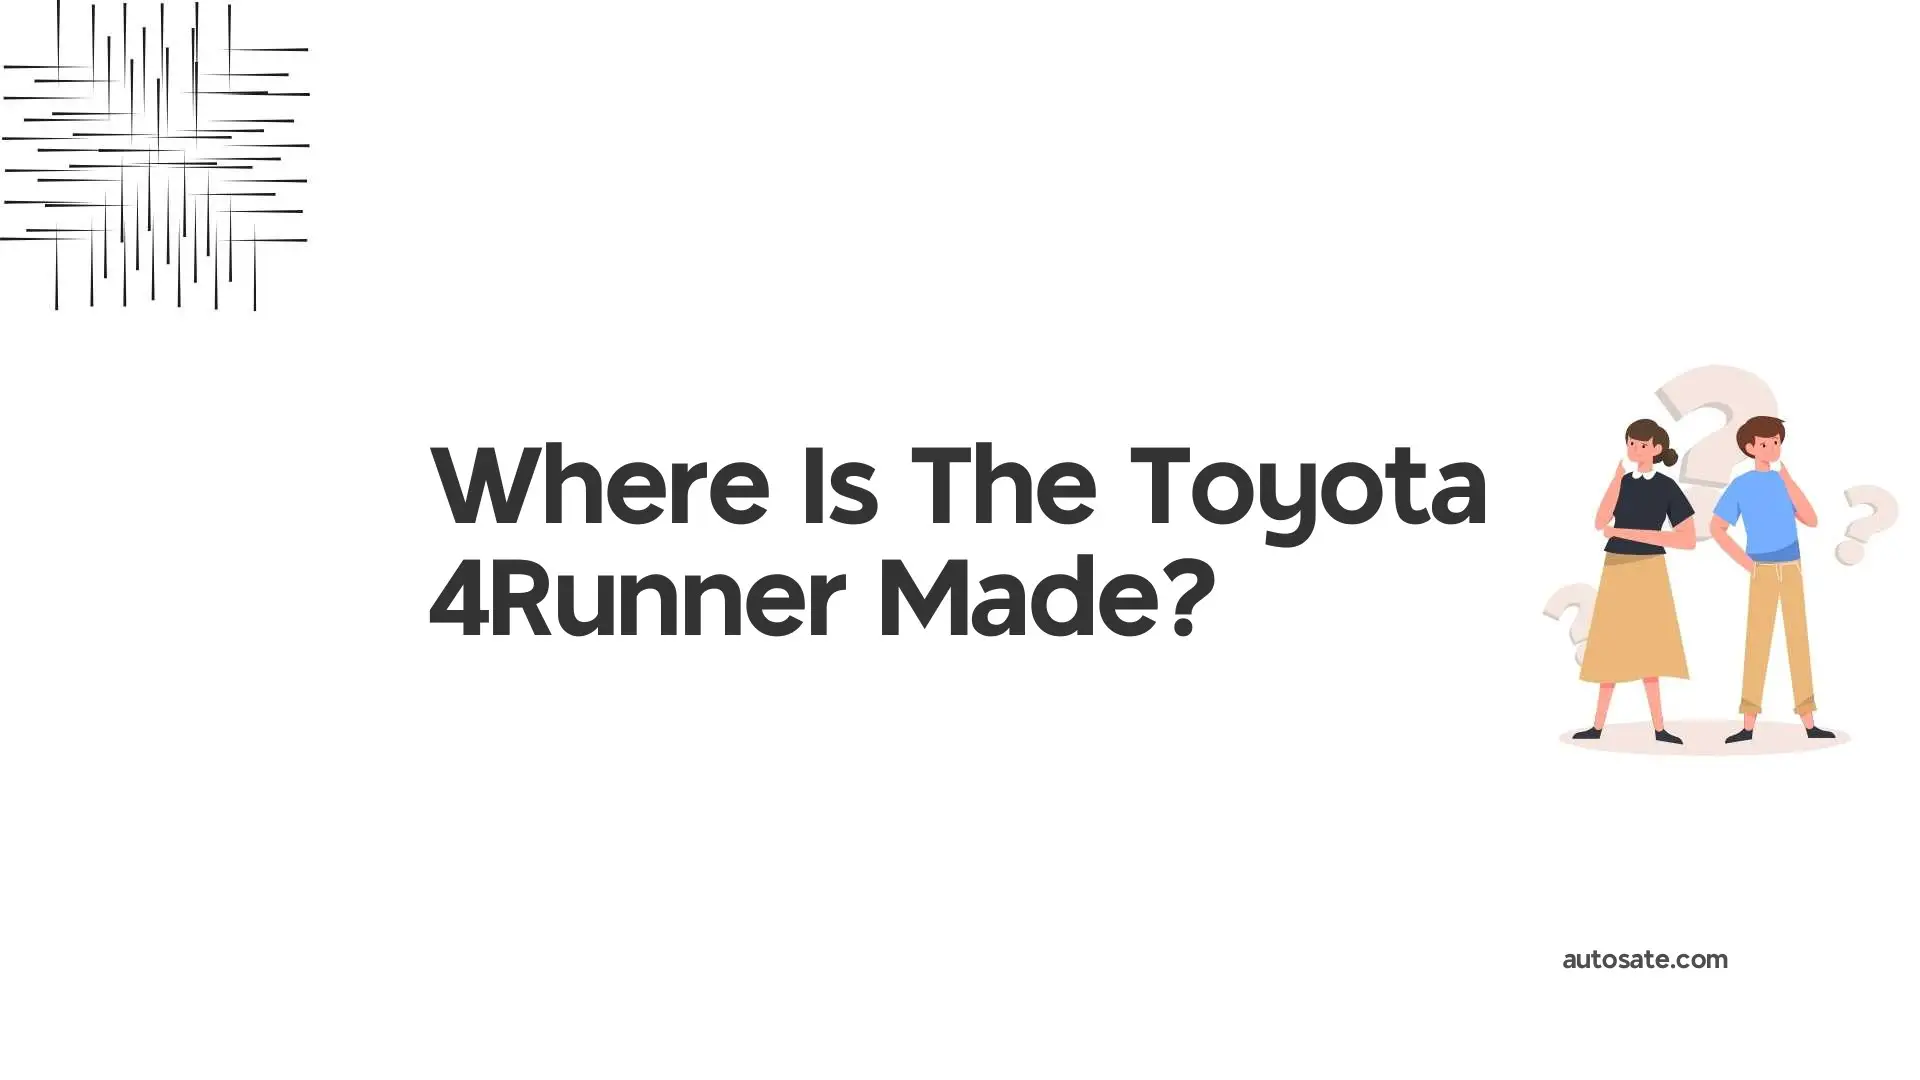 Where Is The Toyota 4Runner Made?